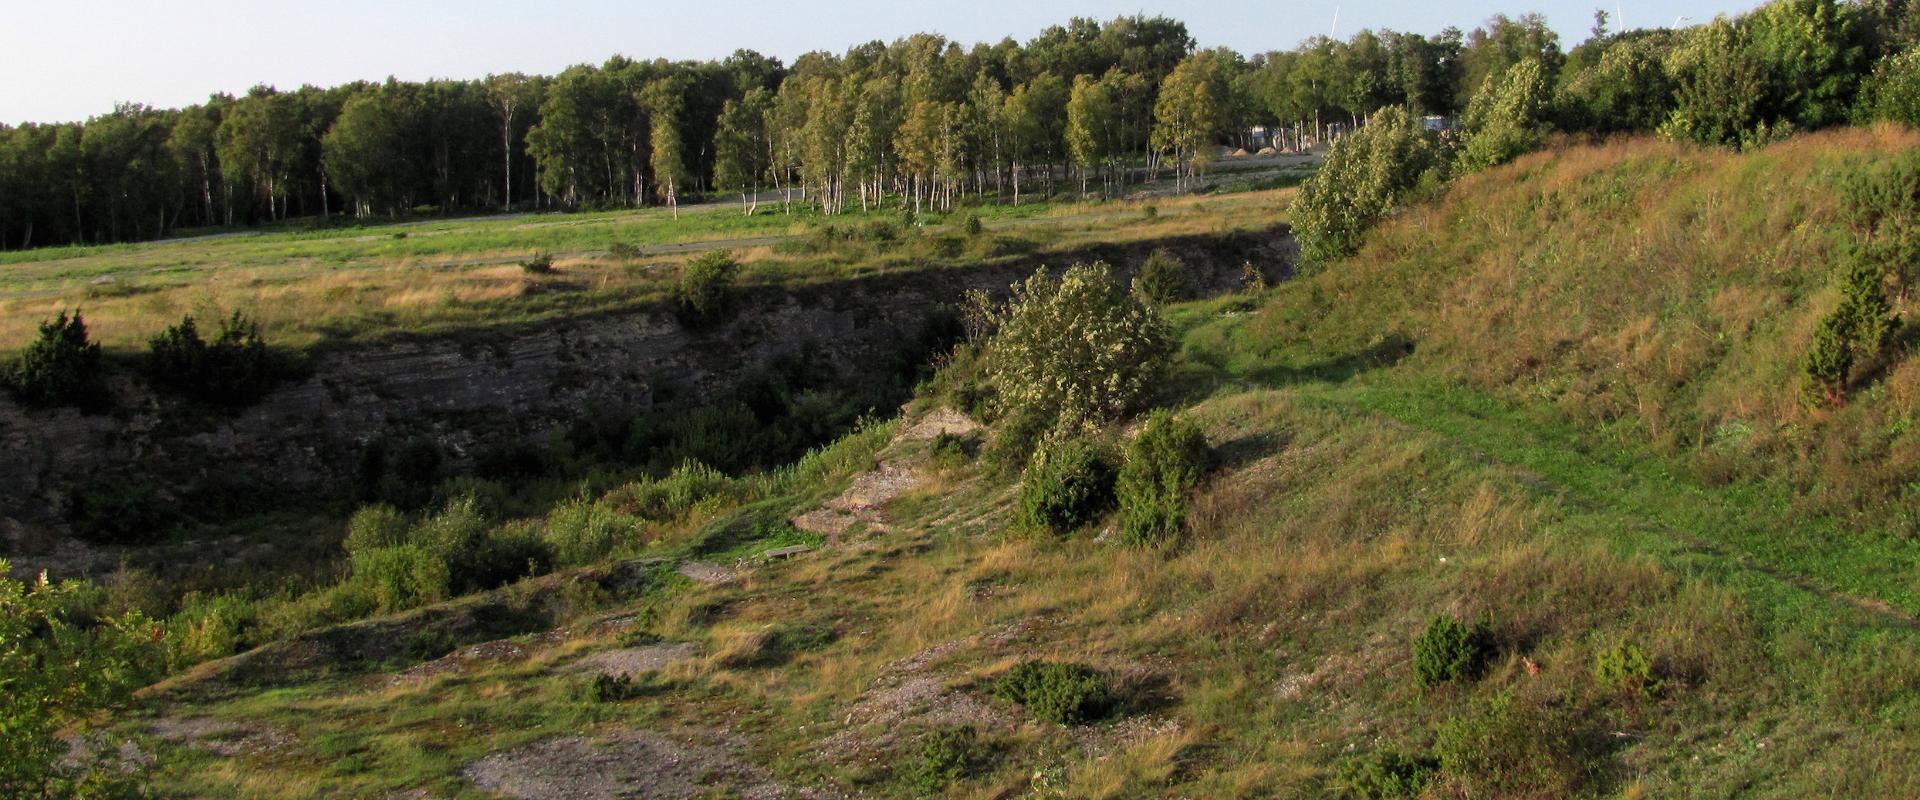 Bastion of Peter the Great's naval fortress, or Muula hills